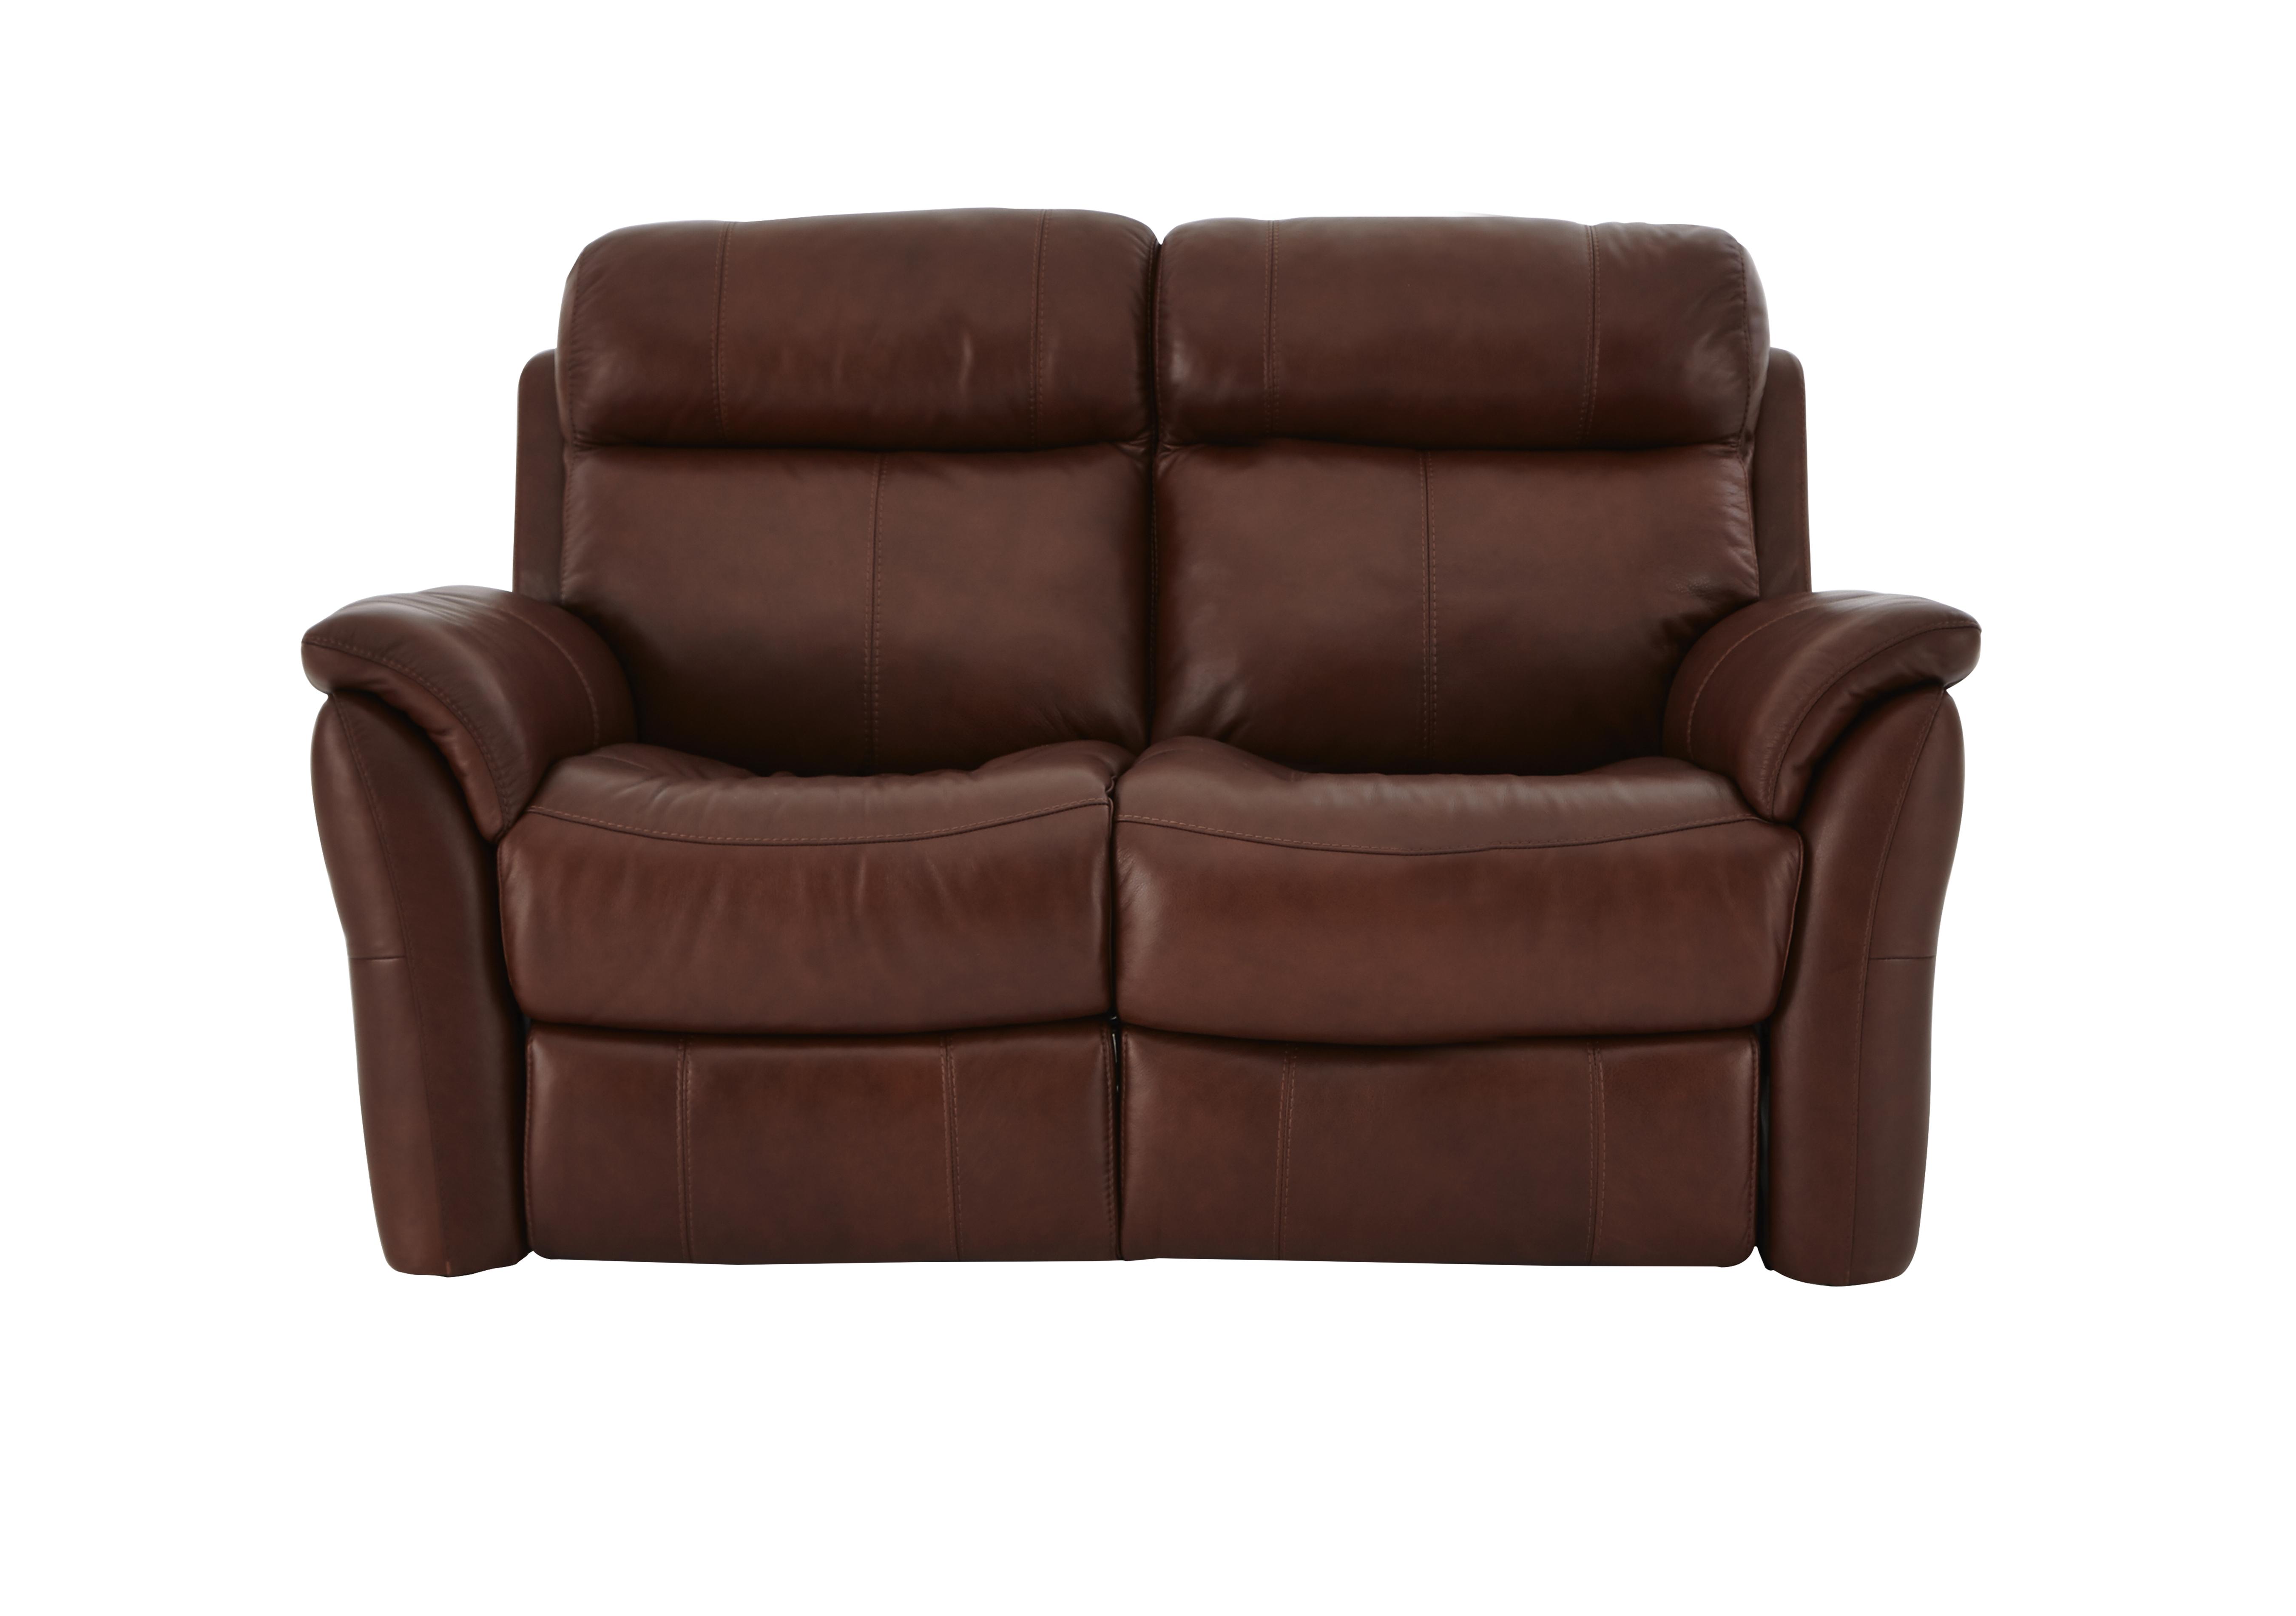 Relax Station Revive 2 Seater Leather Sofa in Sk-297e Cumin on Furniture Village